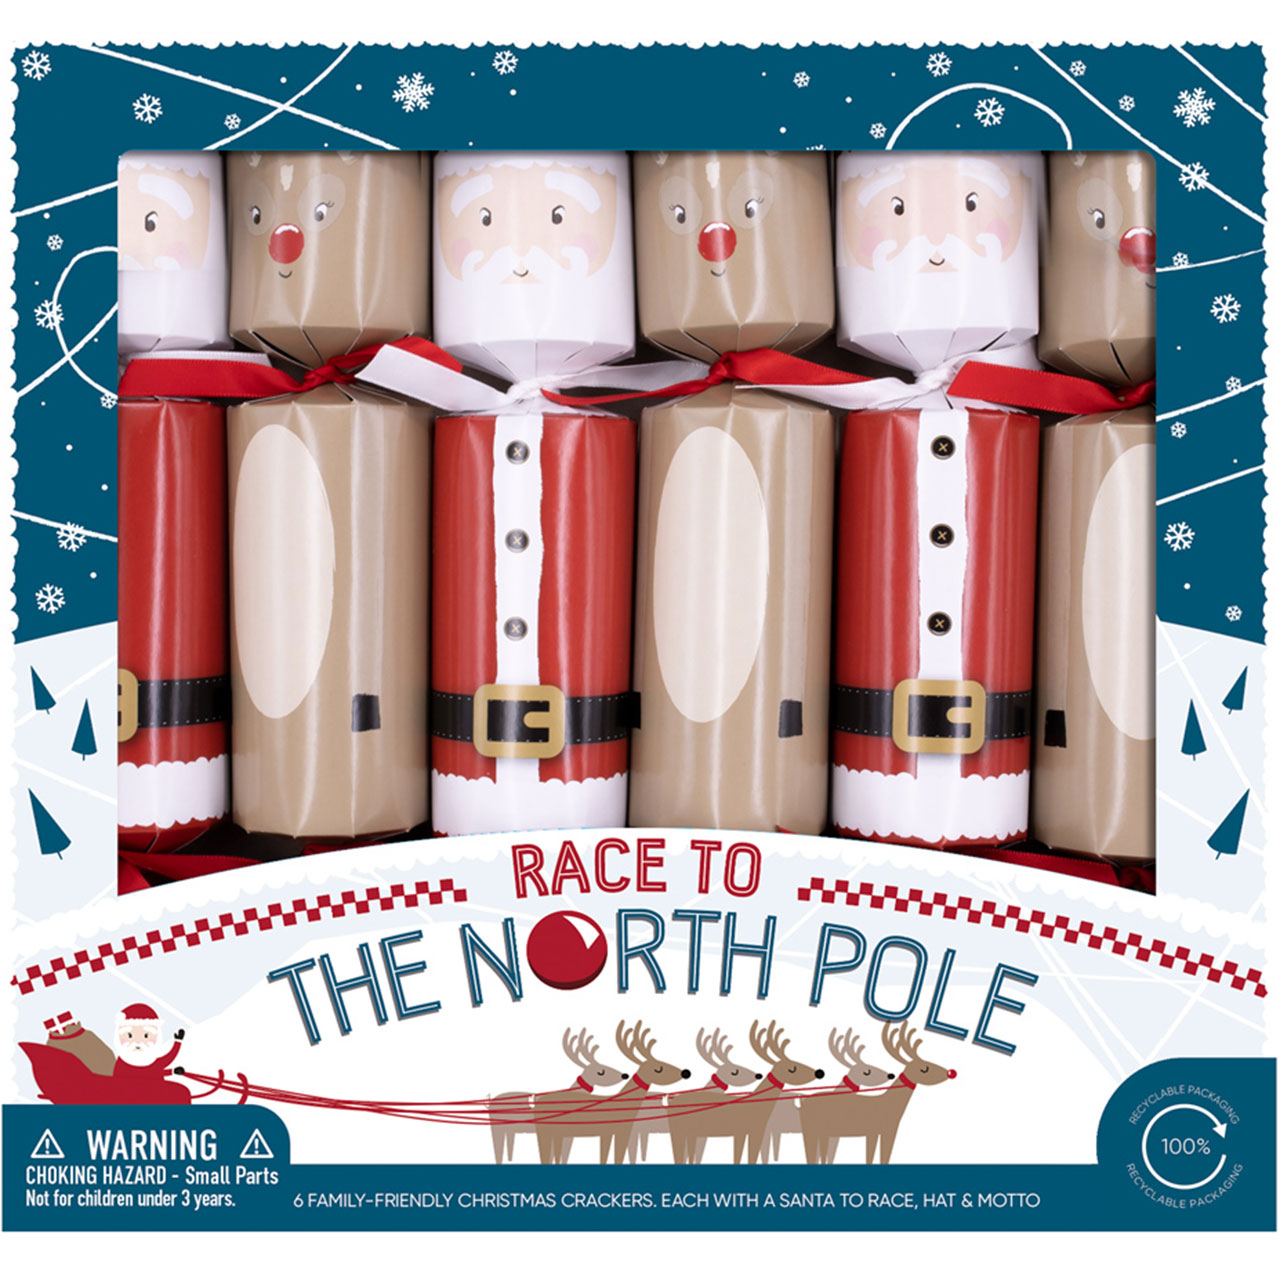 Crackers - Race to the North Pole 